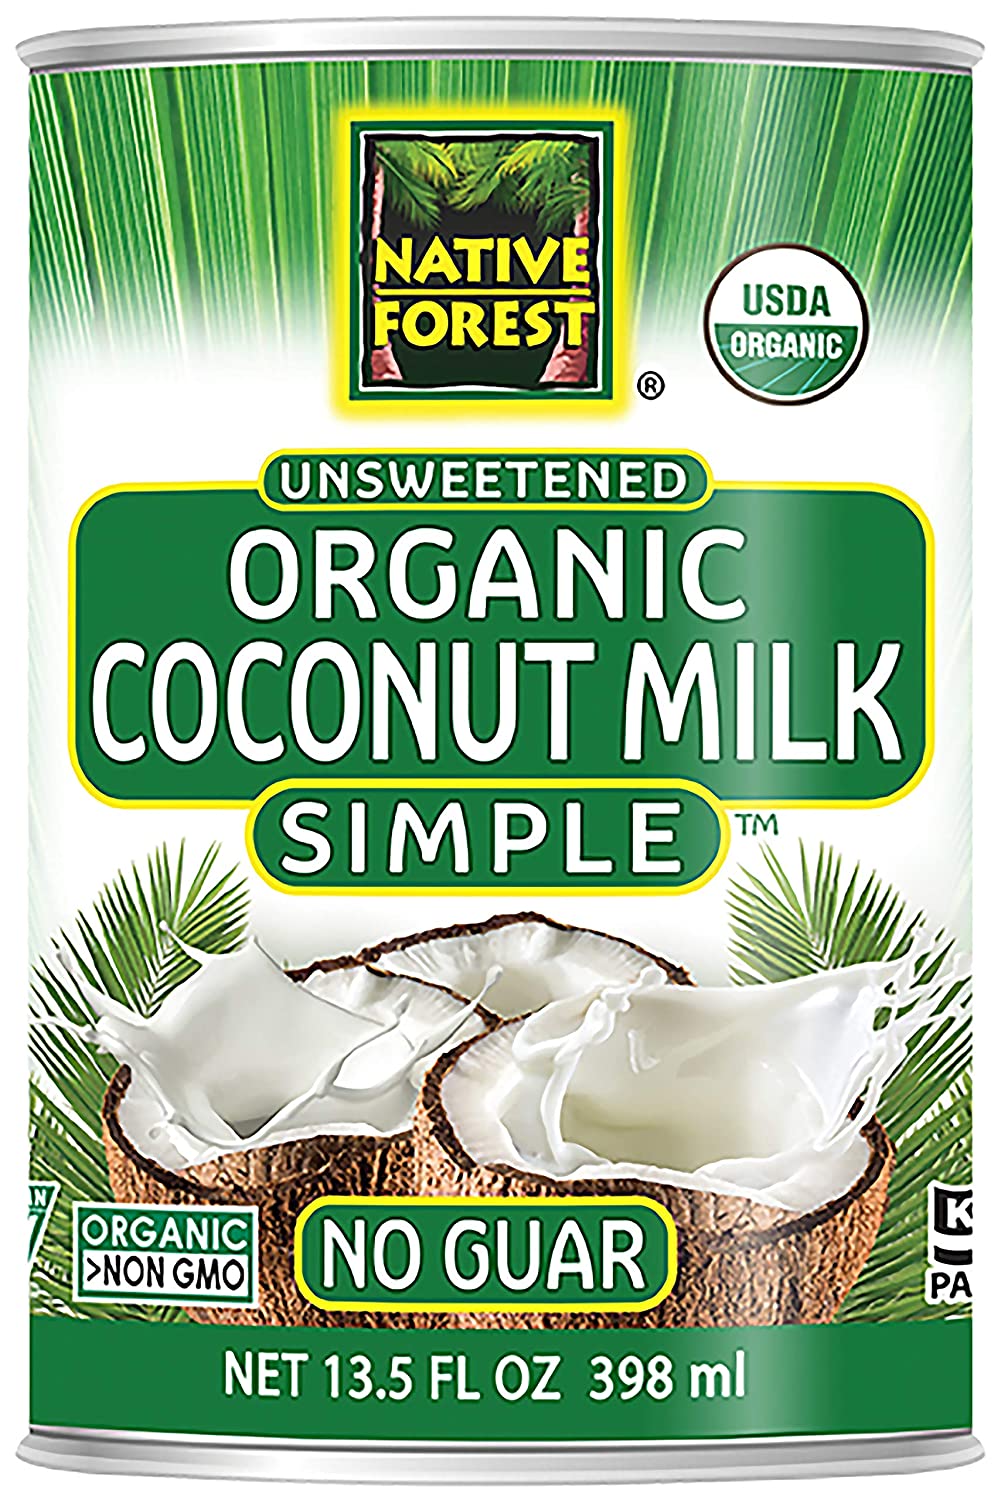 Native Forest Simple Organic Unsweetened Coconut Milk, 13.5 Fl Oz 3-Packs